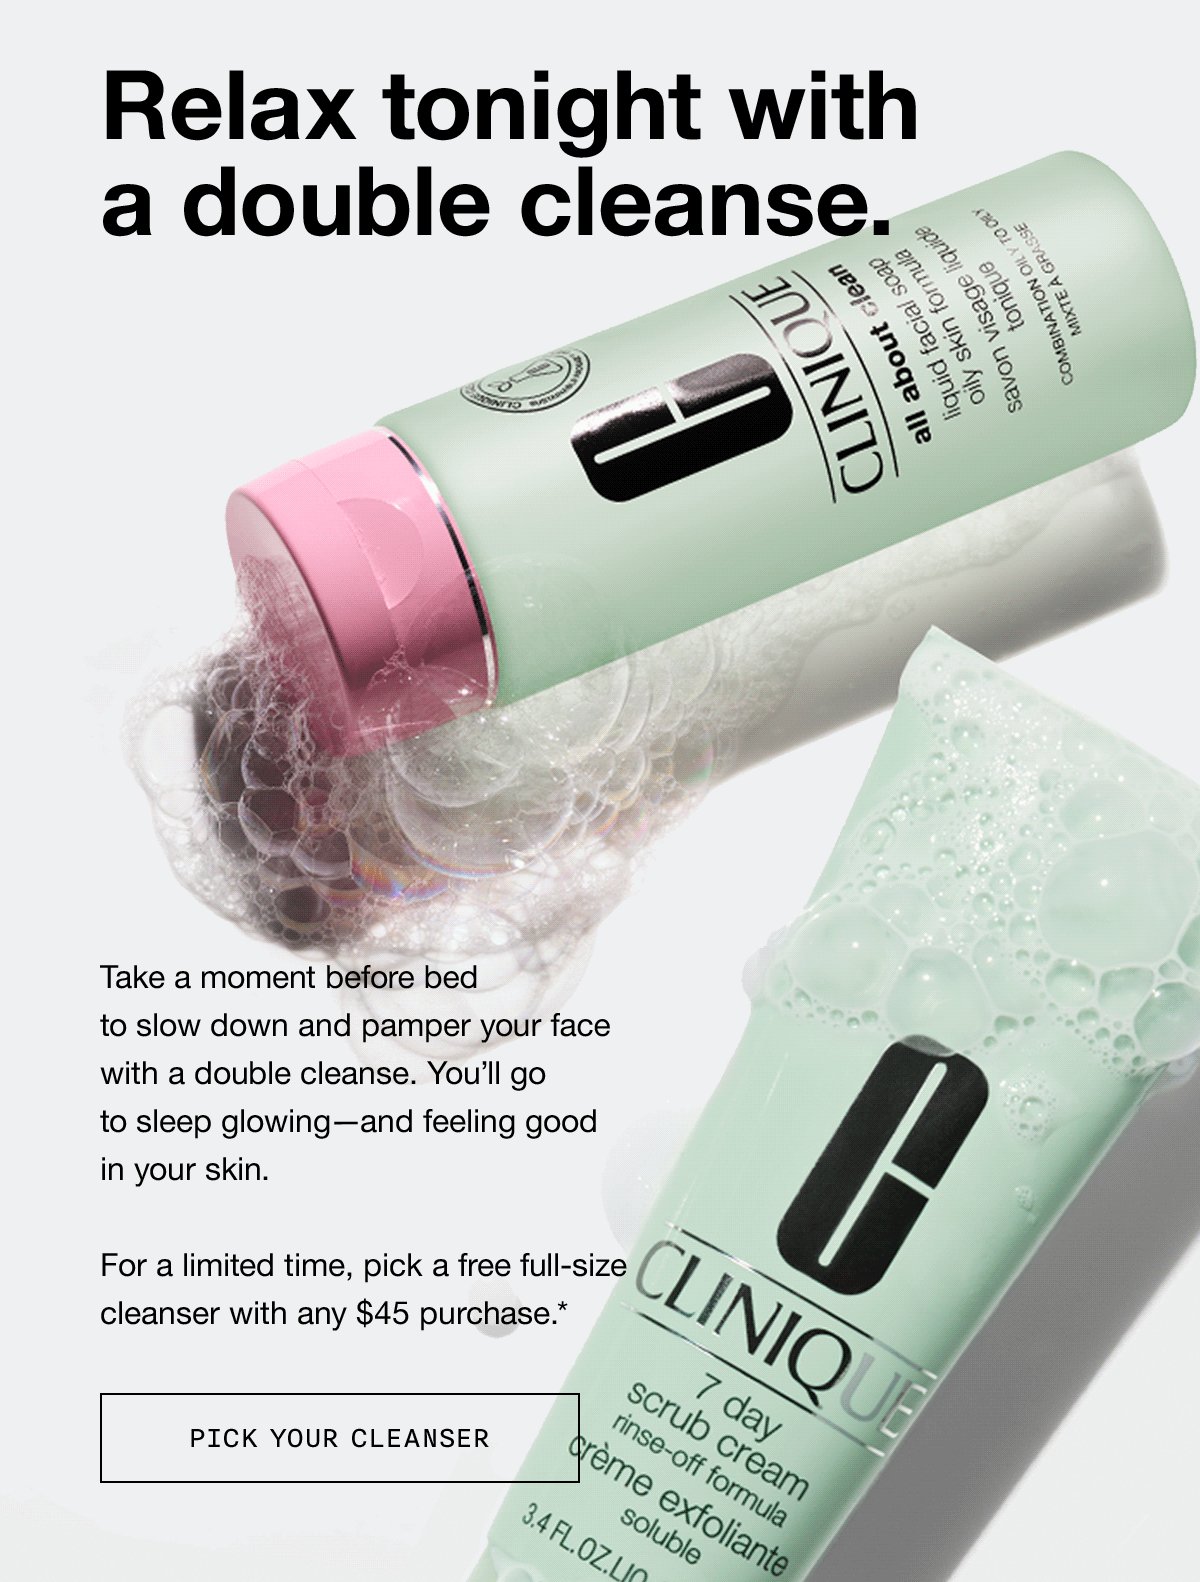 Relax tonight with a double cleanse. Take a moment before bed to slow down and pamper your face with a double cleanse. You'll go to sleep glowing - and feeling good in your skin. For a limited time, pick a free full-size cleanser with any $45 purchase.* PICK YOUR CLEANSER